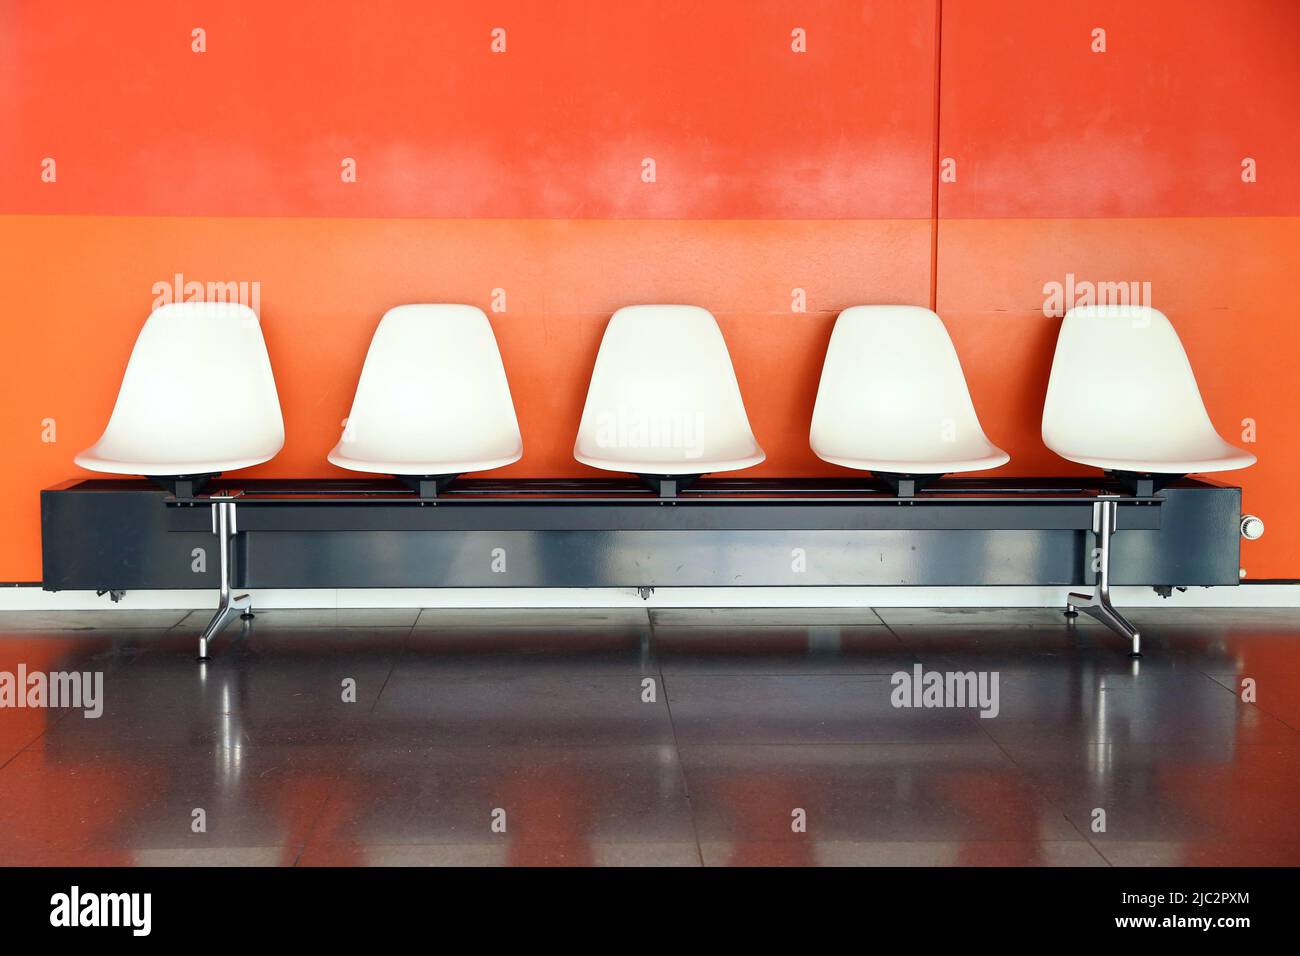 Five white plastic chairs in front of a red wall Stock Photo